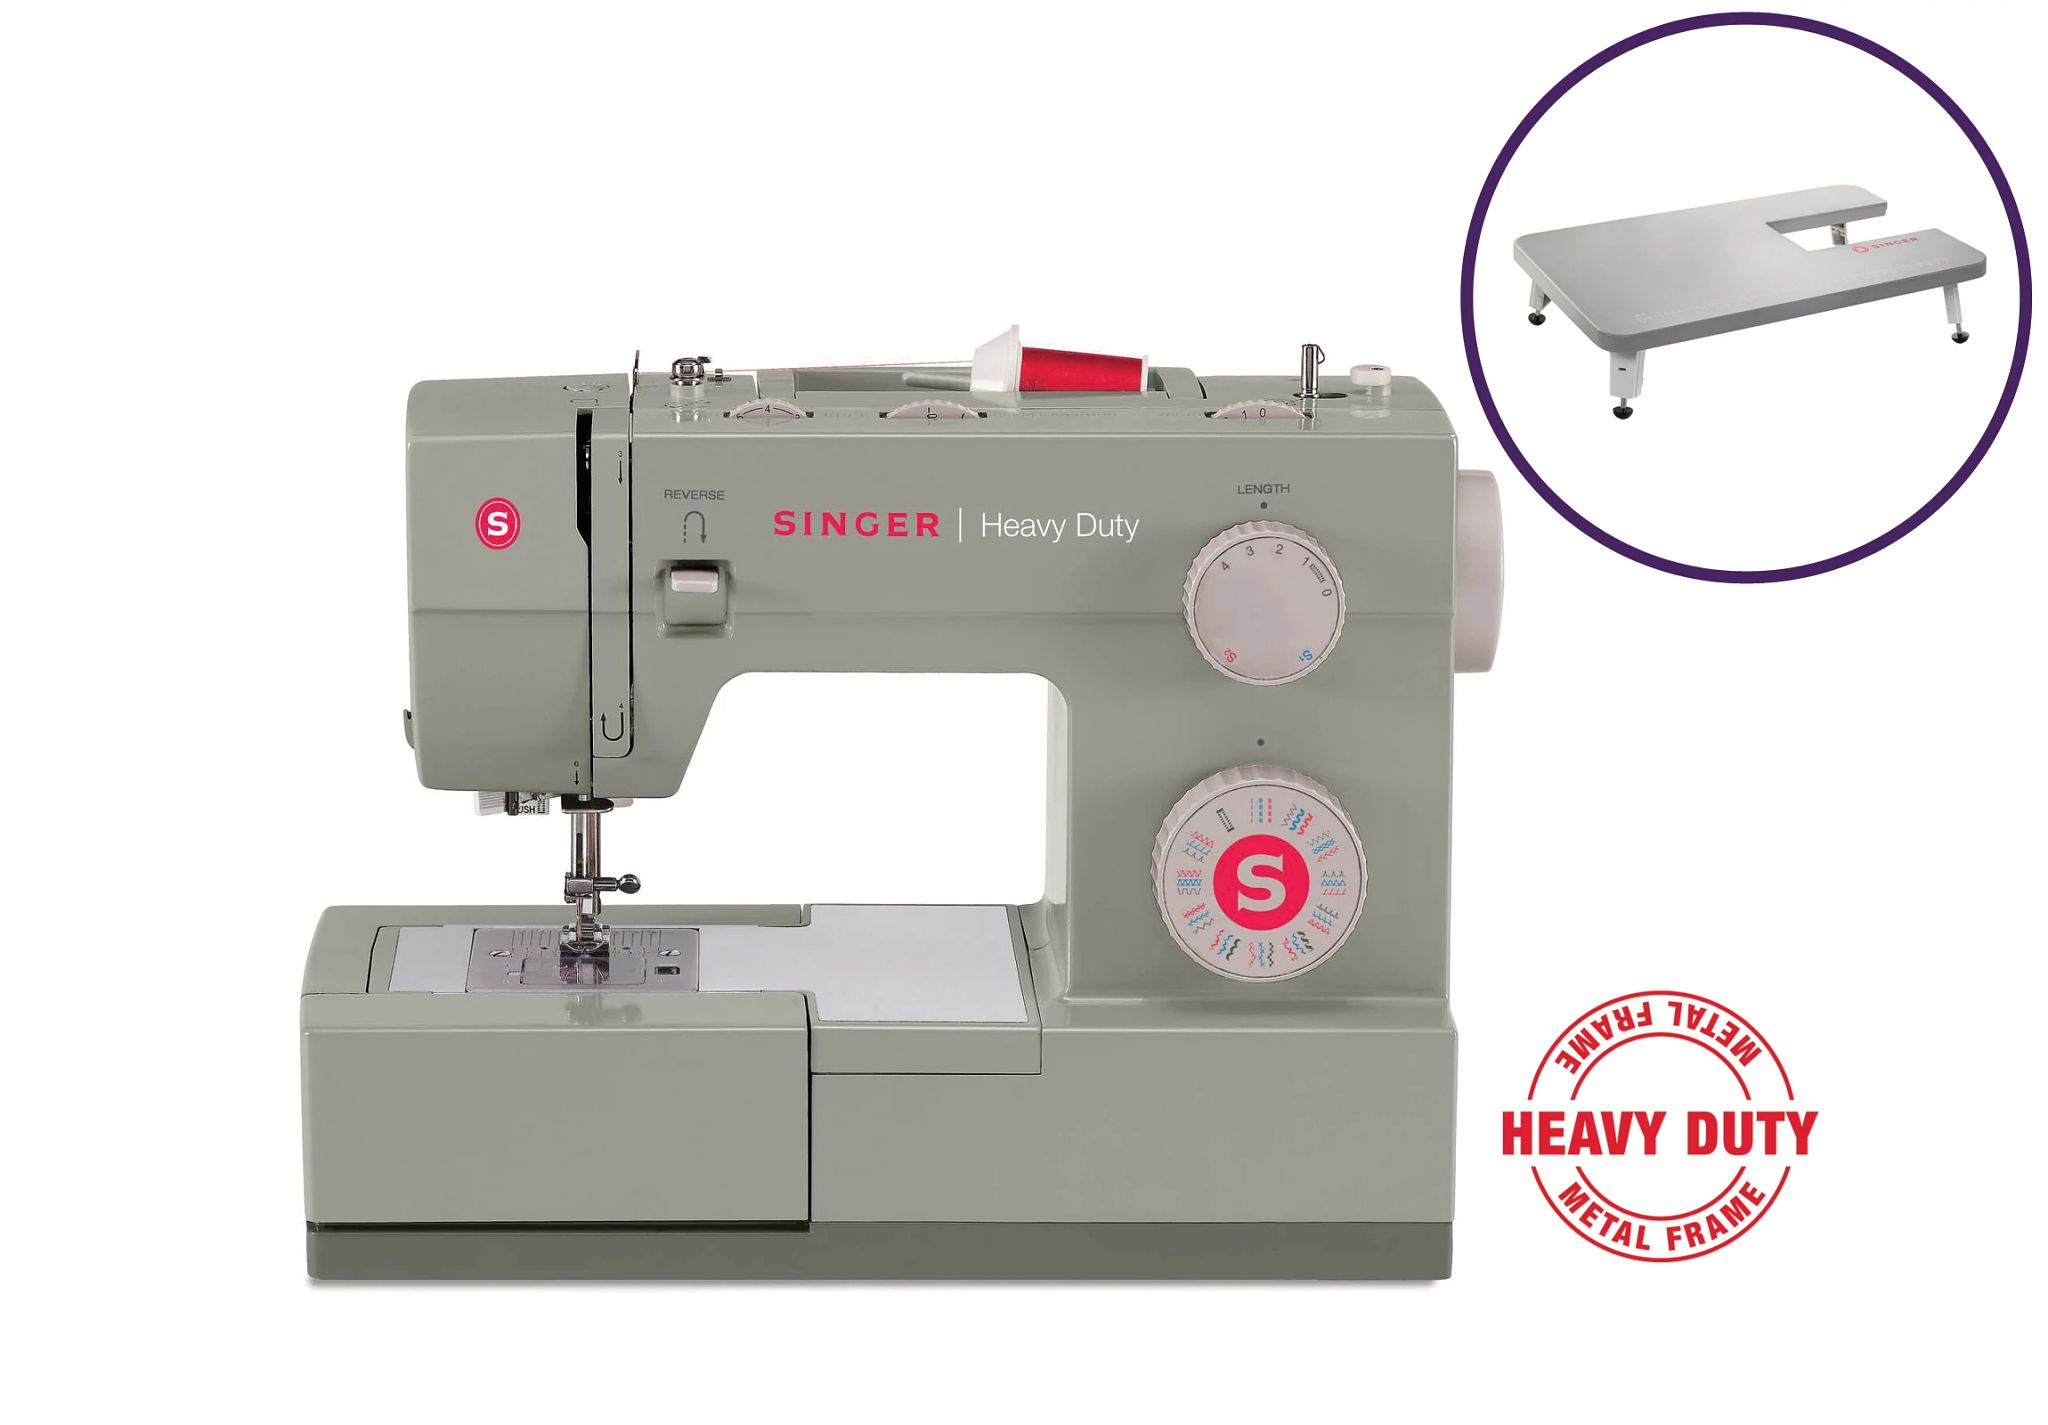 SINGER Heavy Duty 4452 and Extension Table Bundle with $120 free